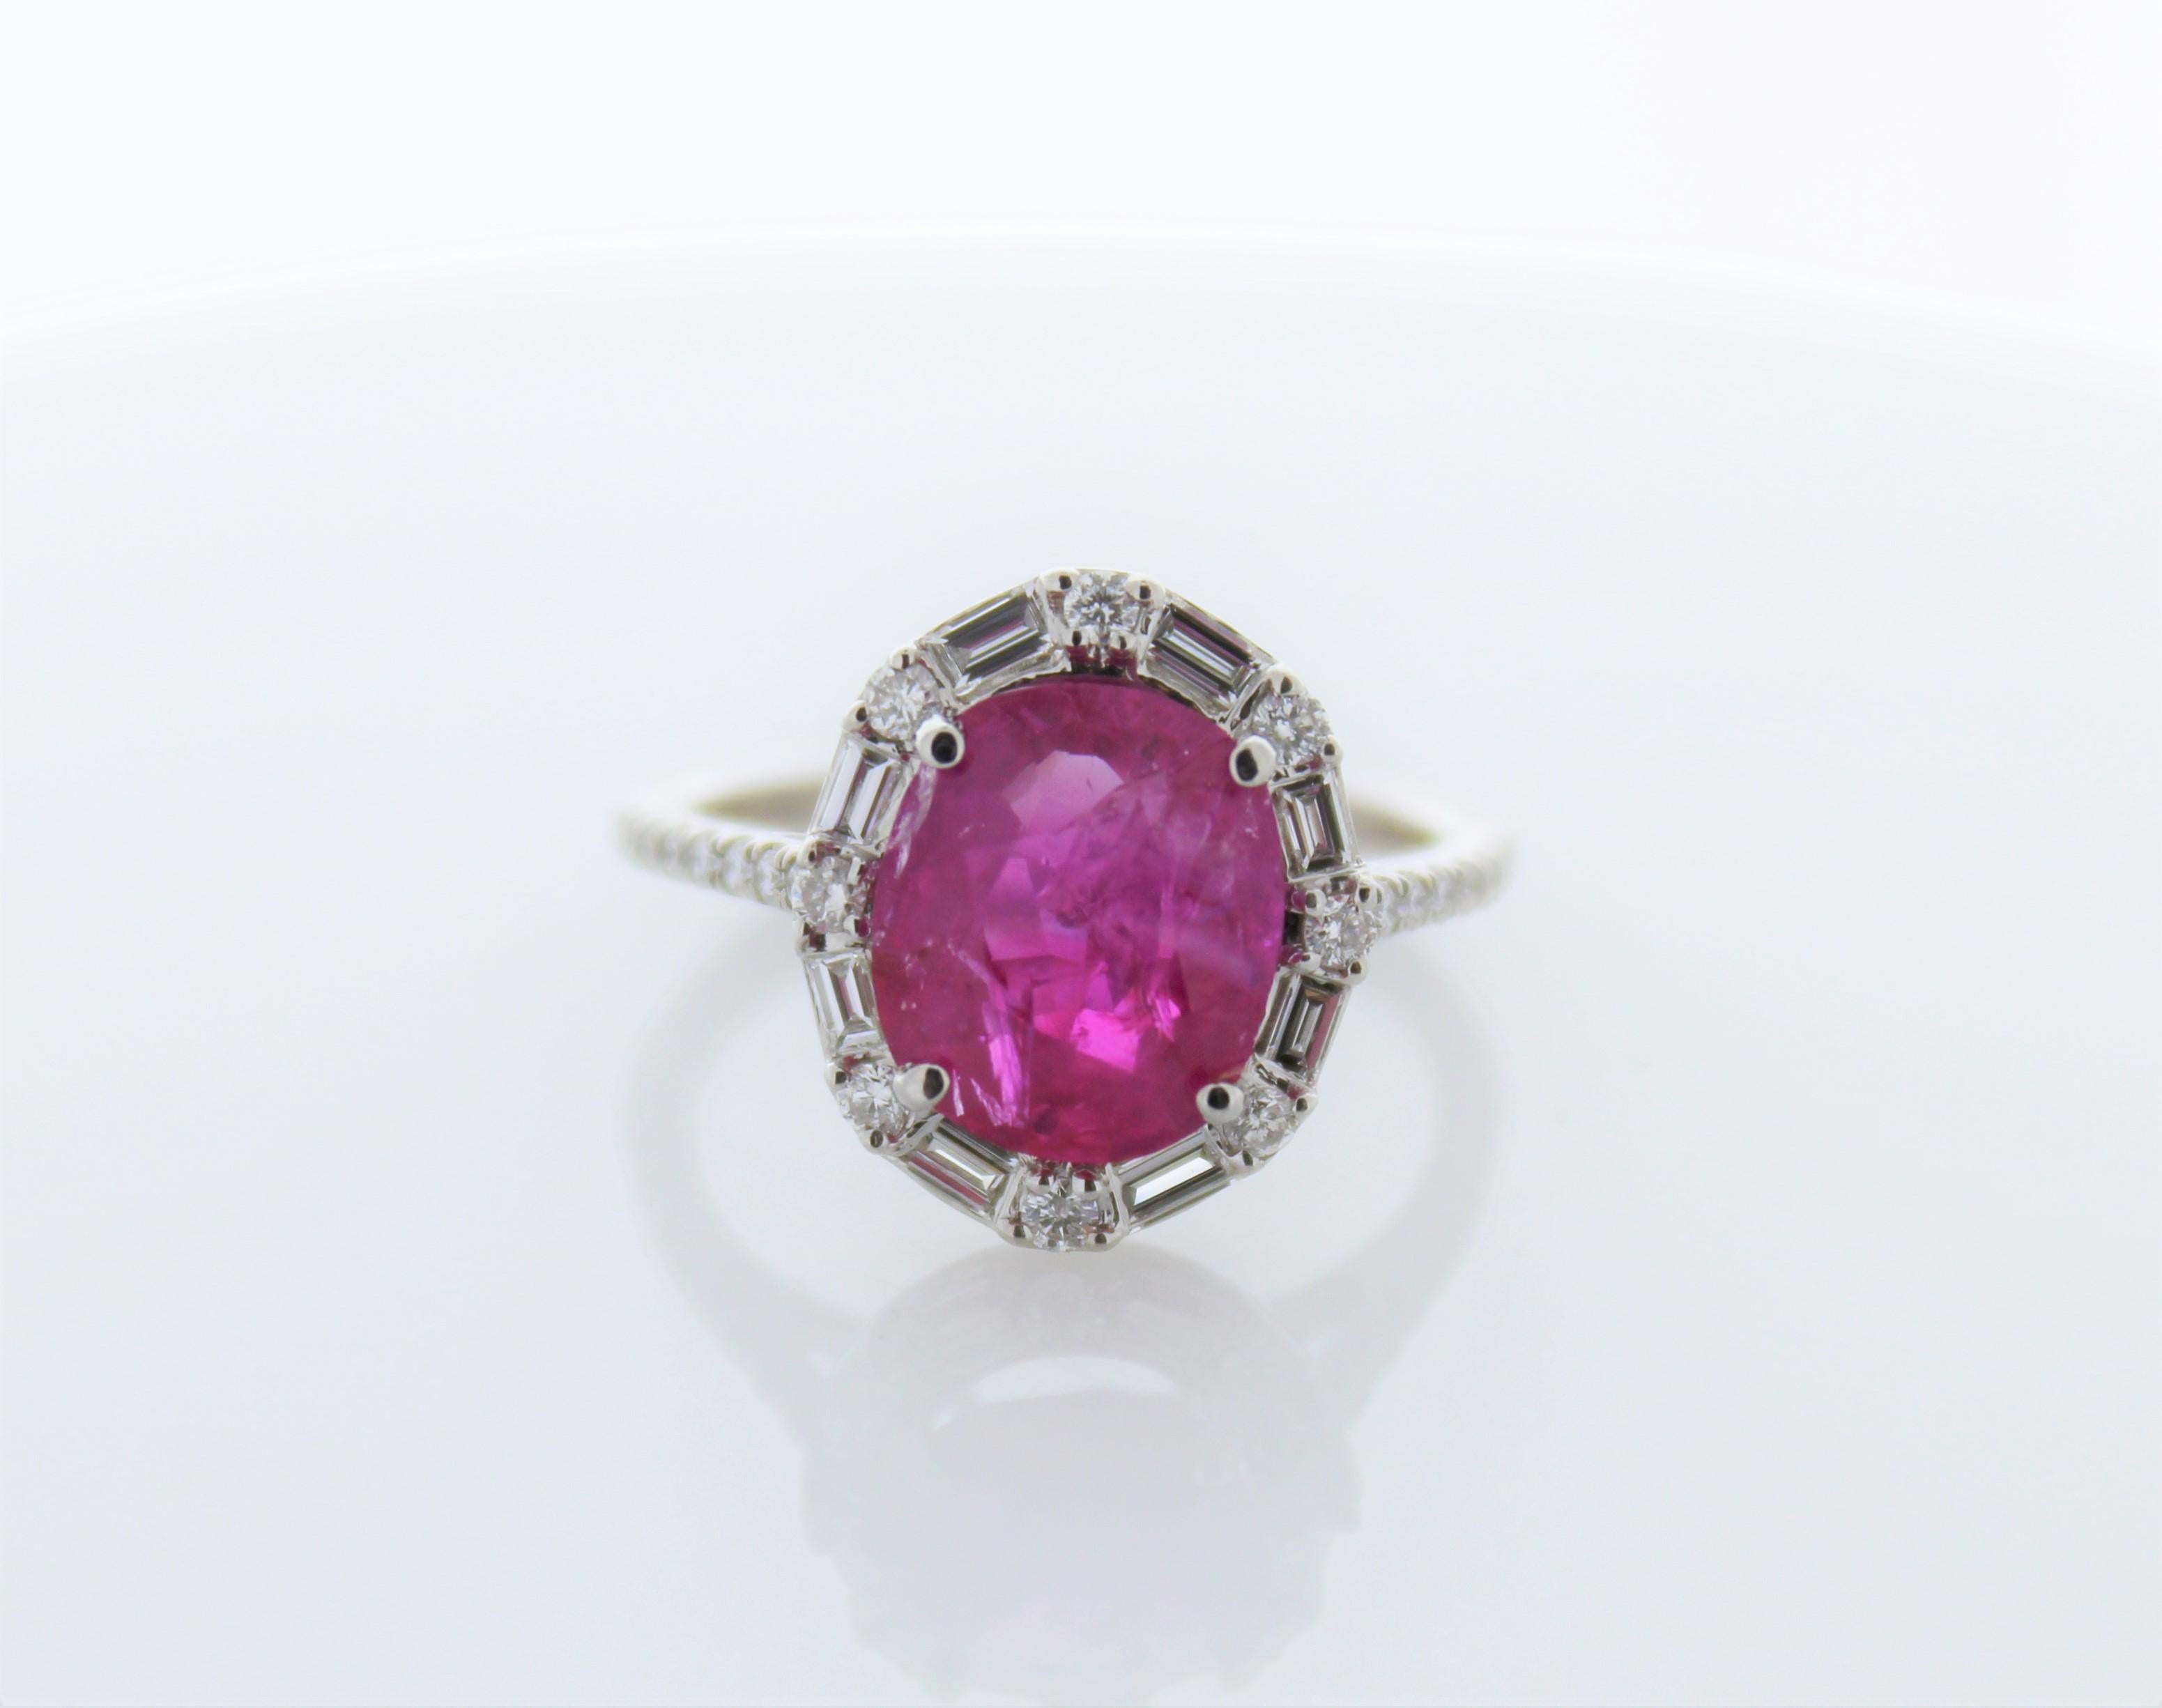 Stylish and sophisticated, this timeless royal ruby and diamond ring is utterly magnificent. No one will be able to take their eyes off the lovely 3.67 carats ruby, which is expertly paired with 32 natural diamonds that total 0.53 carat. The ring is